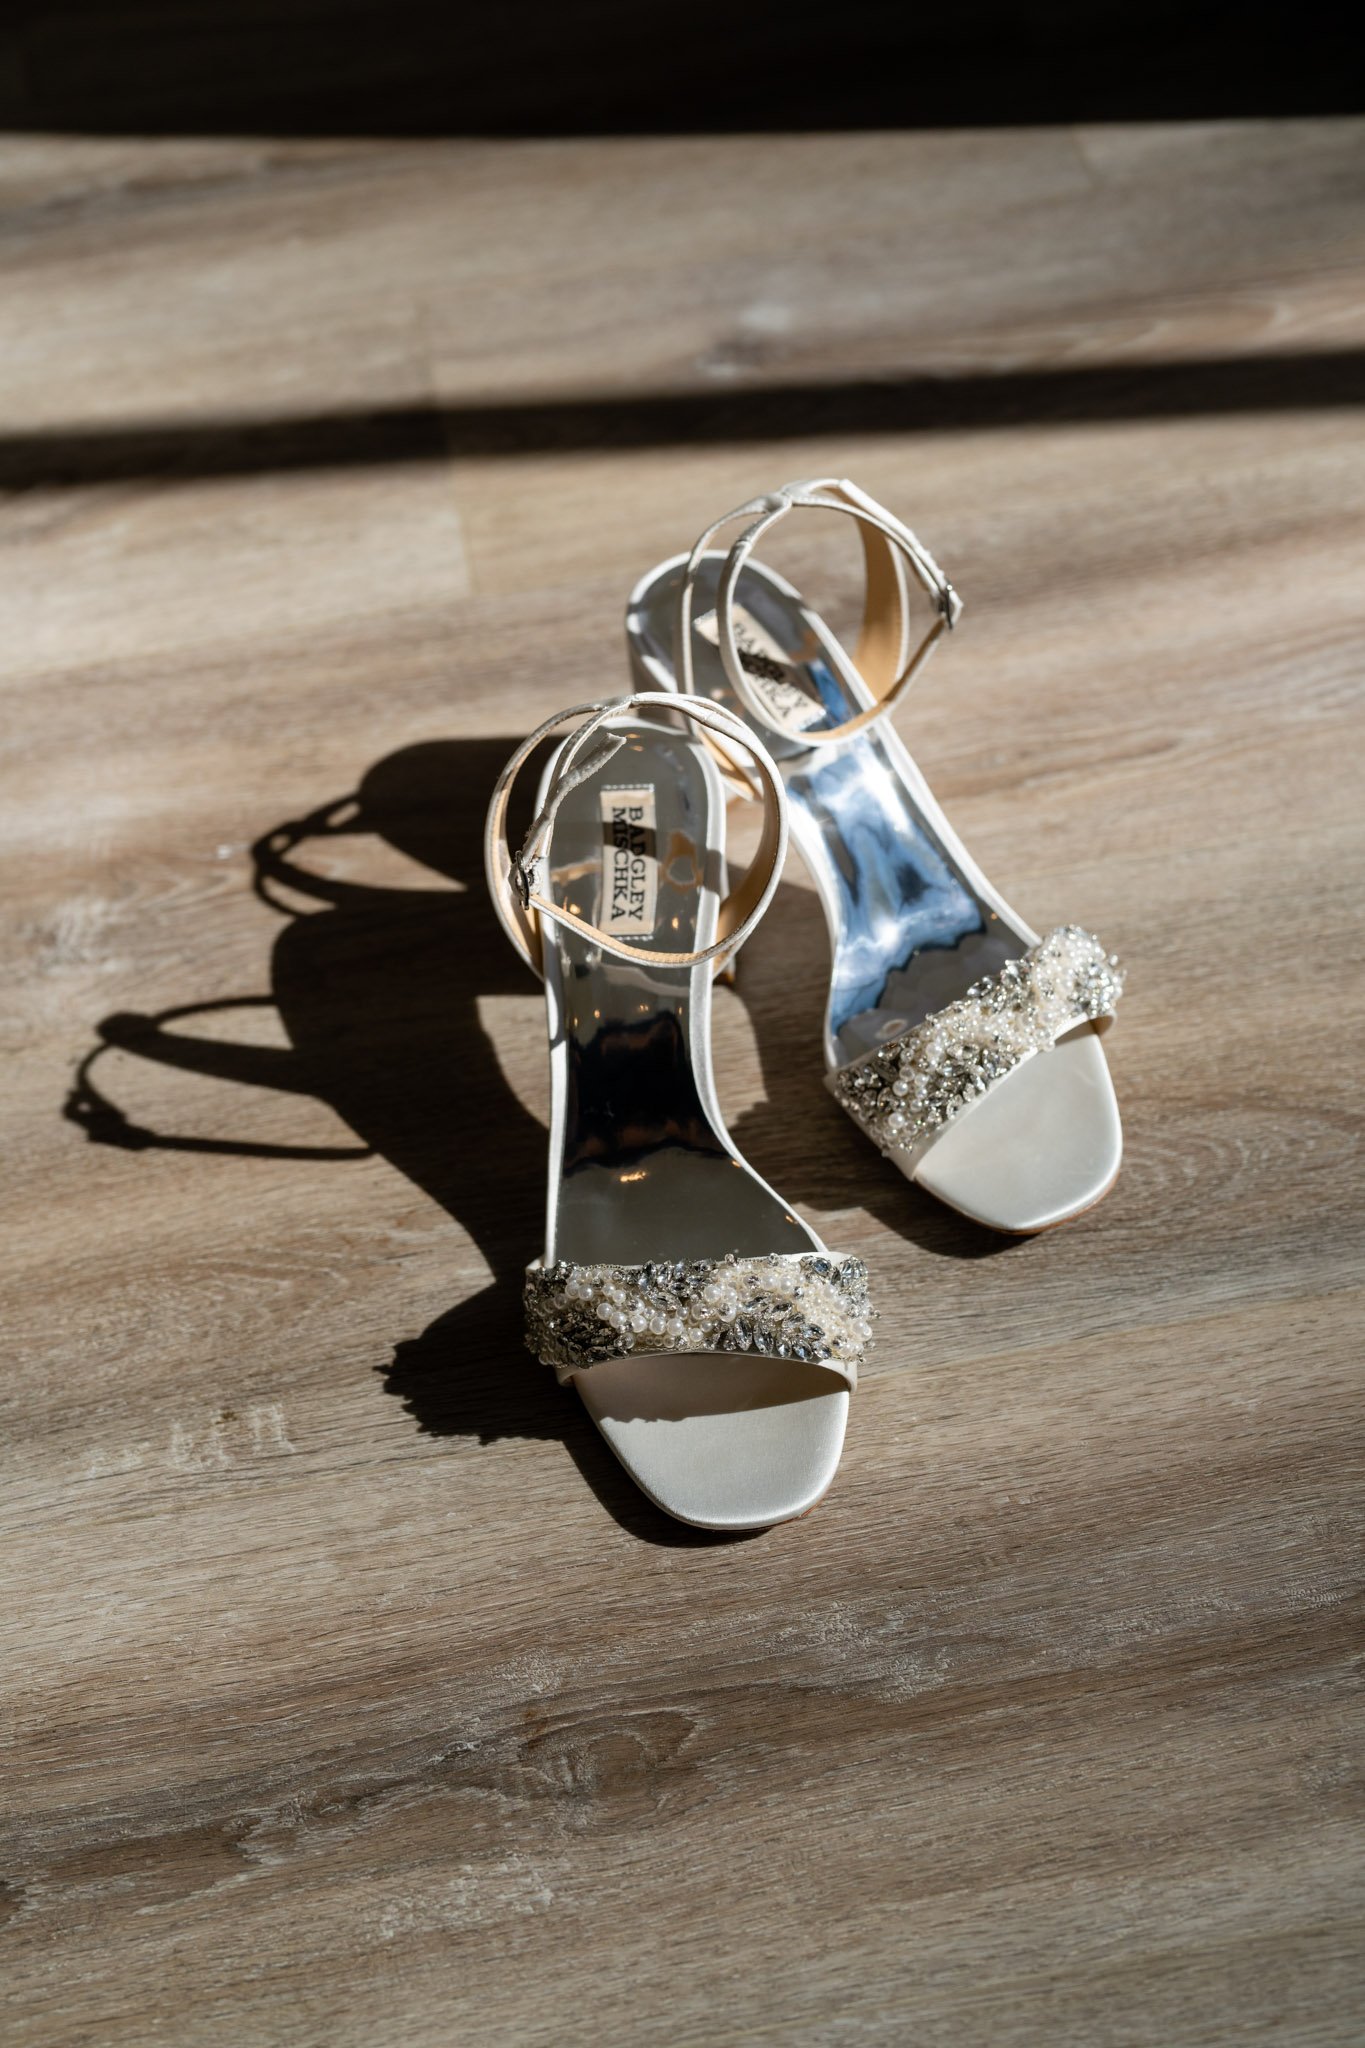 Silver healed bridal shoes with bejeweled straps in the sun at the Arlo Austin TX The Amber Studio